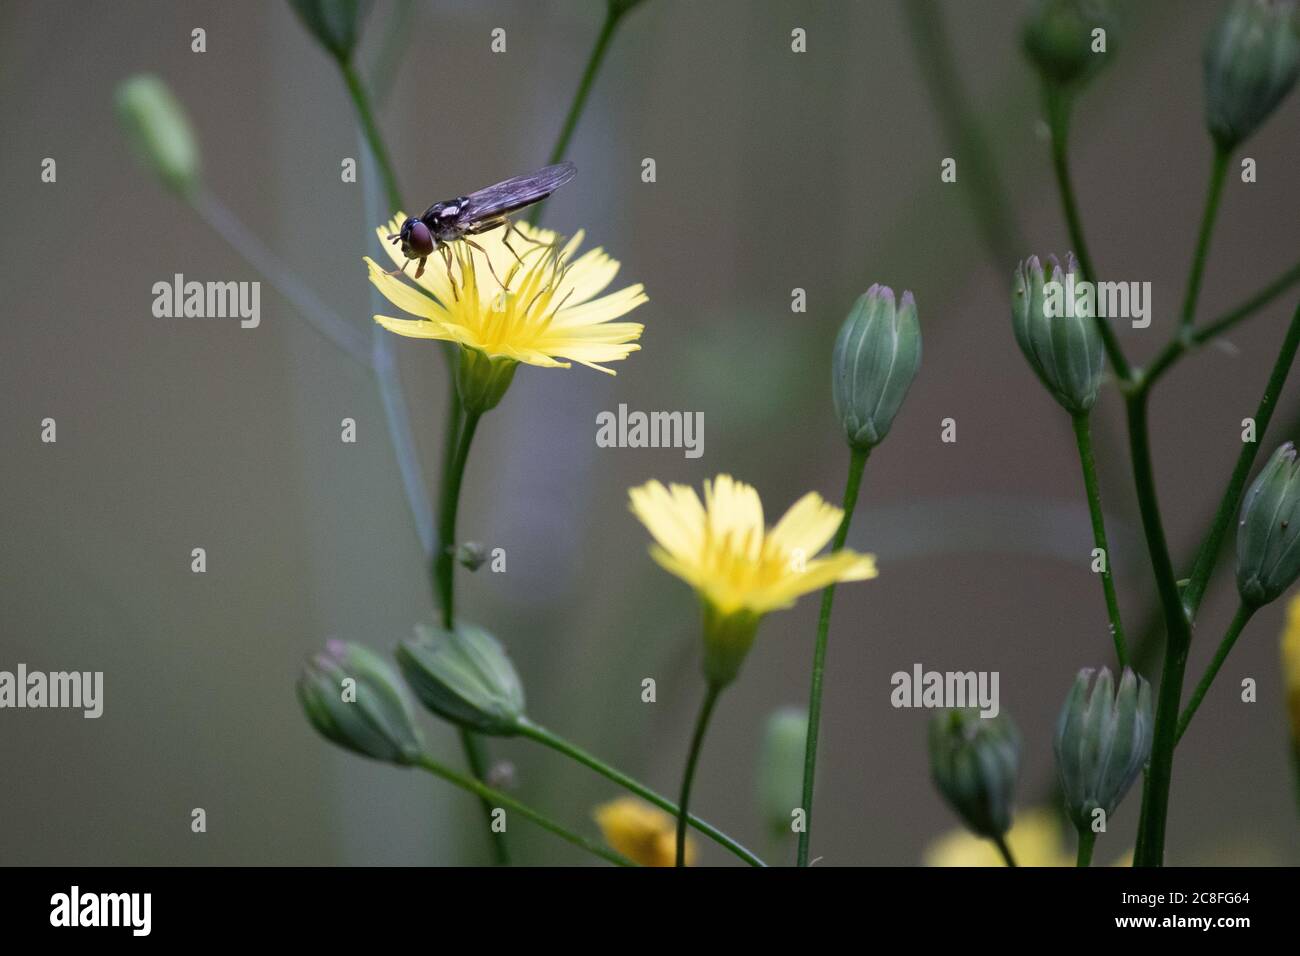 A hover fly feeds on a dandelion flower in an English country garden. Stock Photo